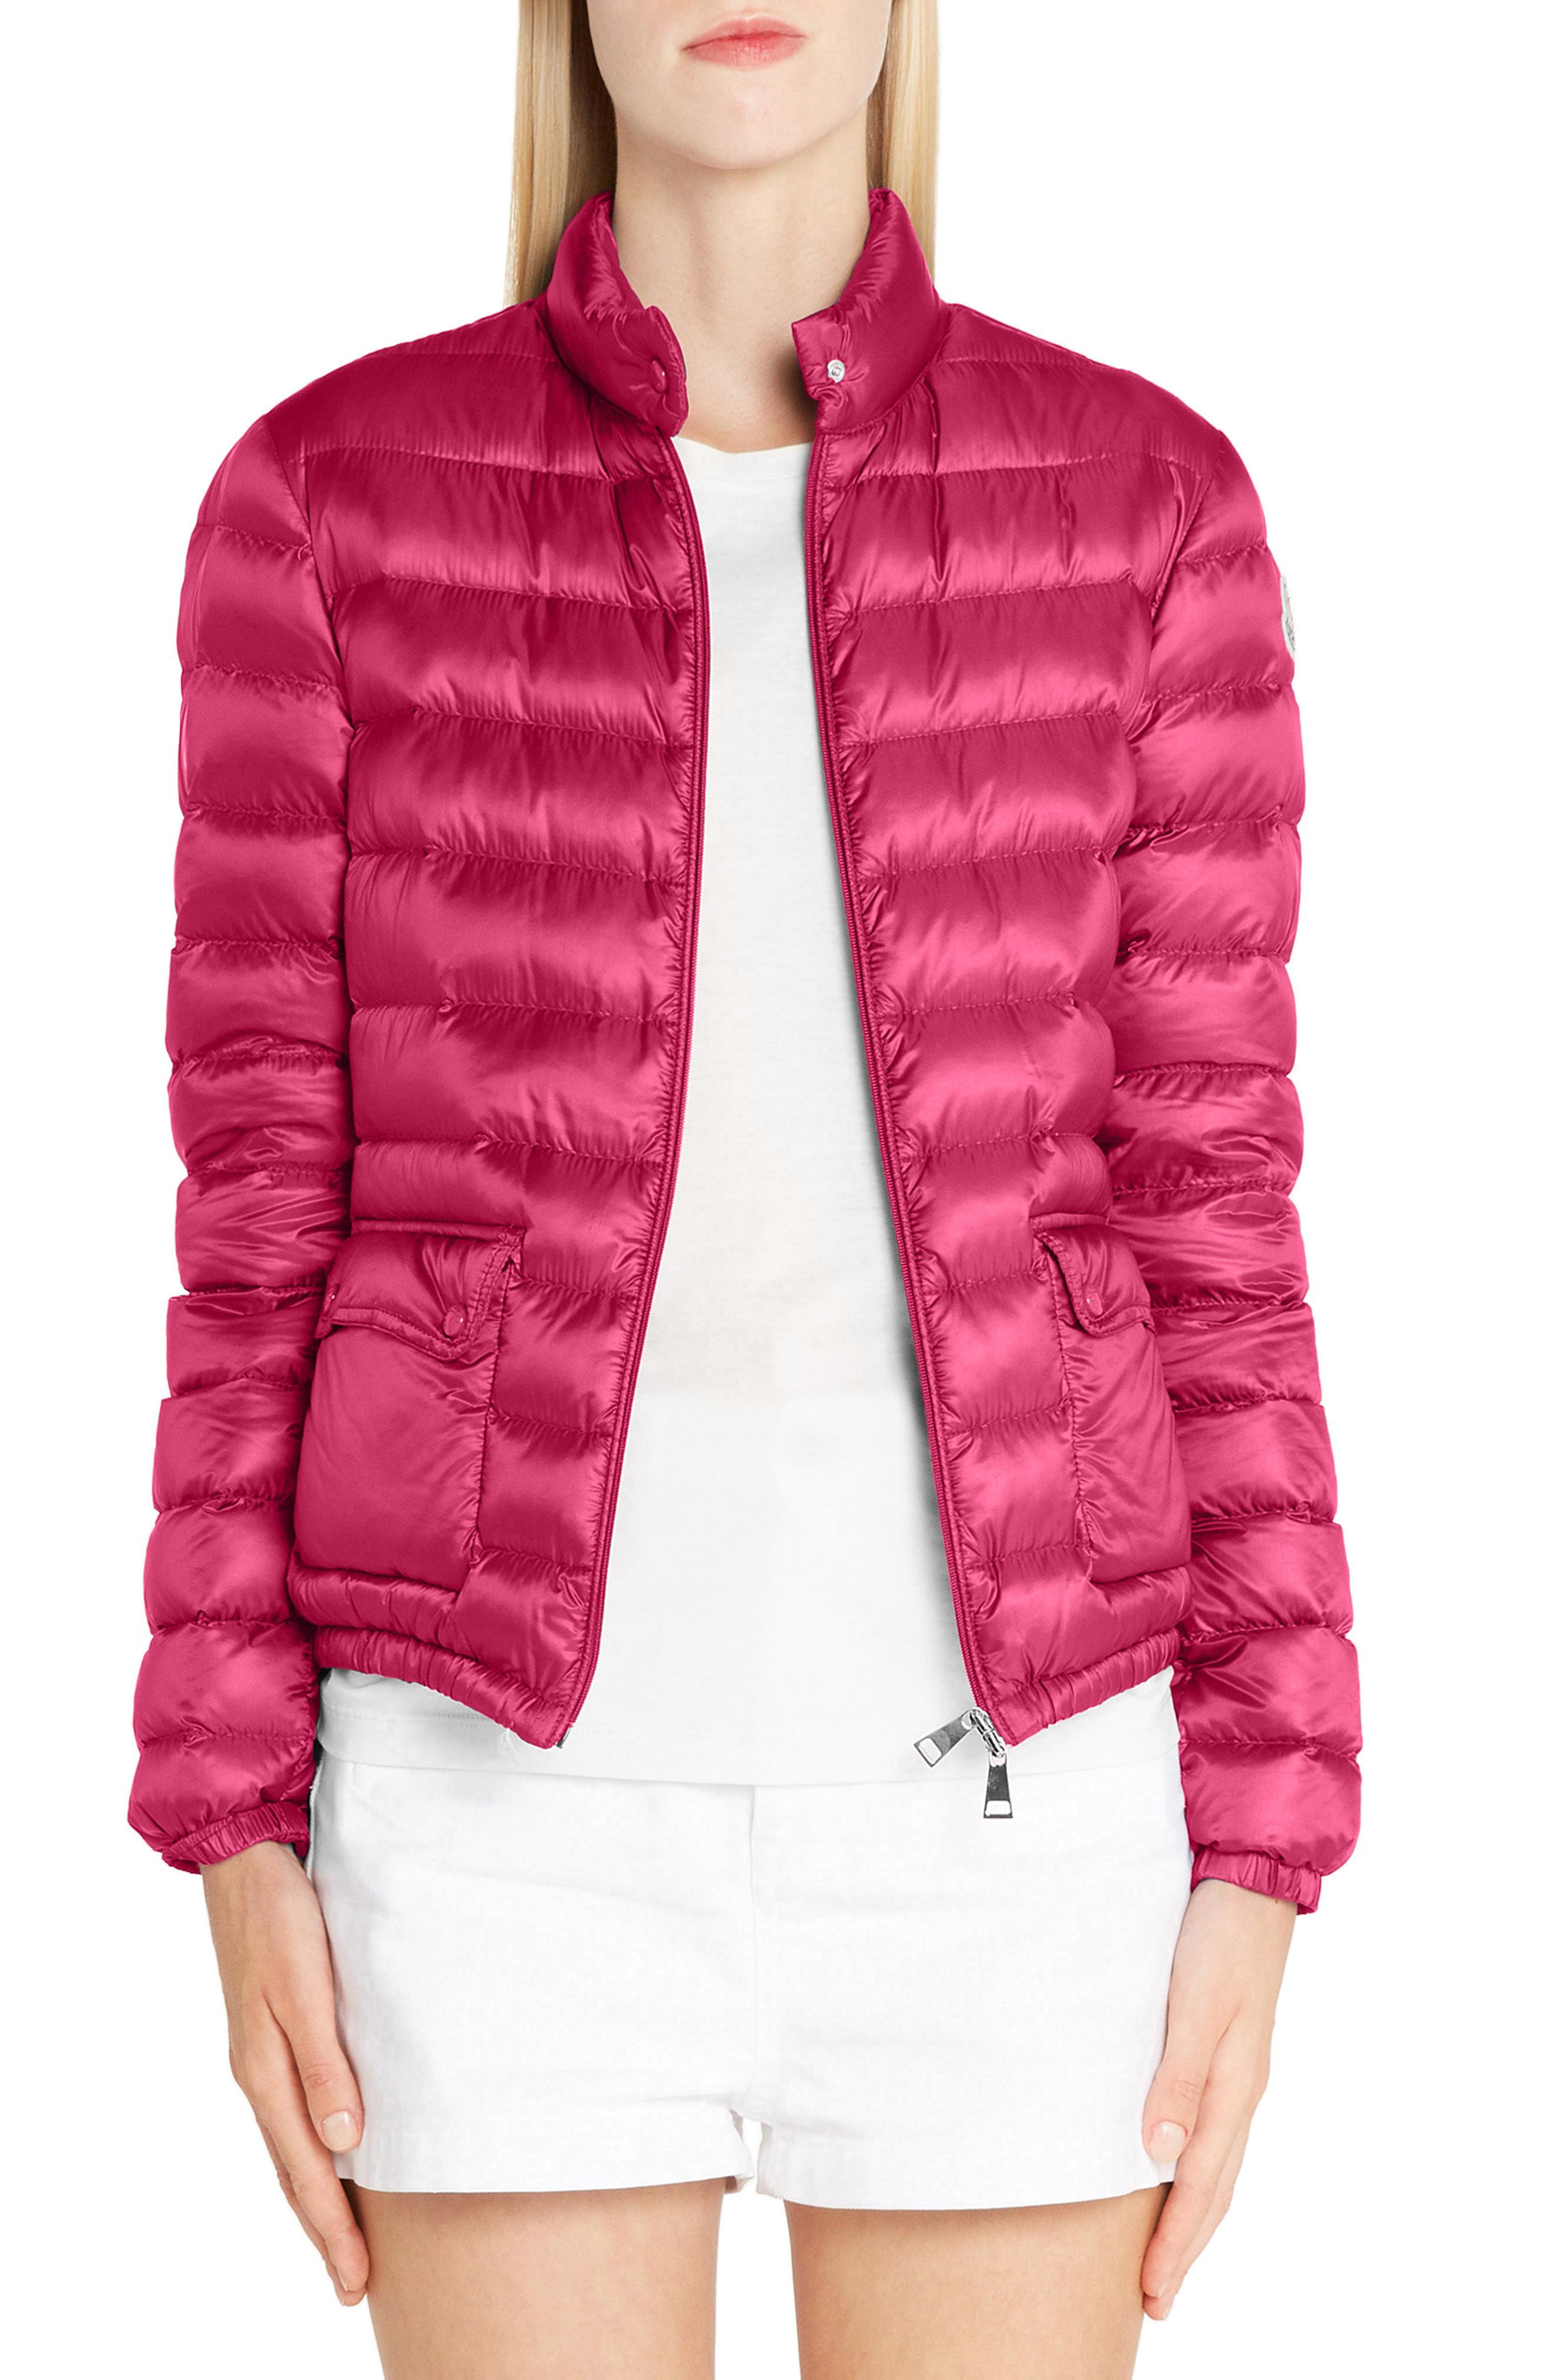 Lyst - Moncler Lans Water Resistant Quilted Down Jacket in Pink